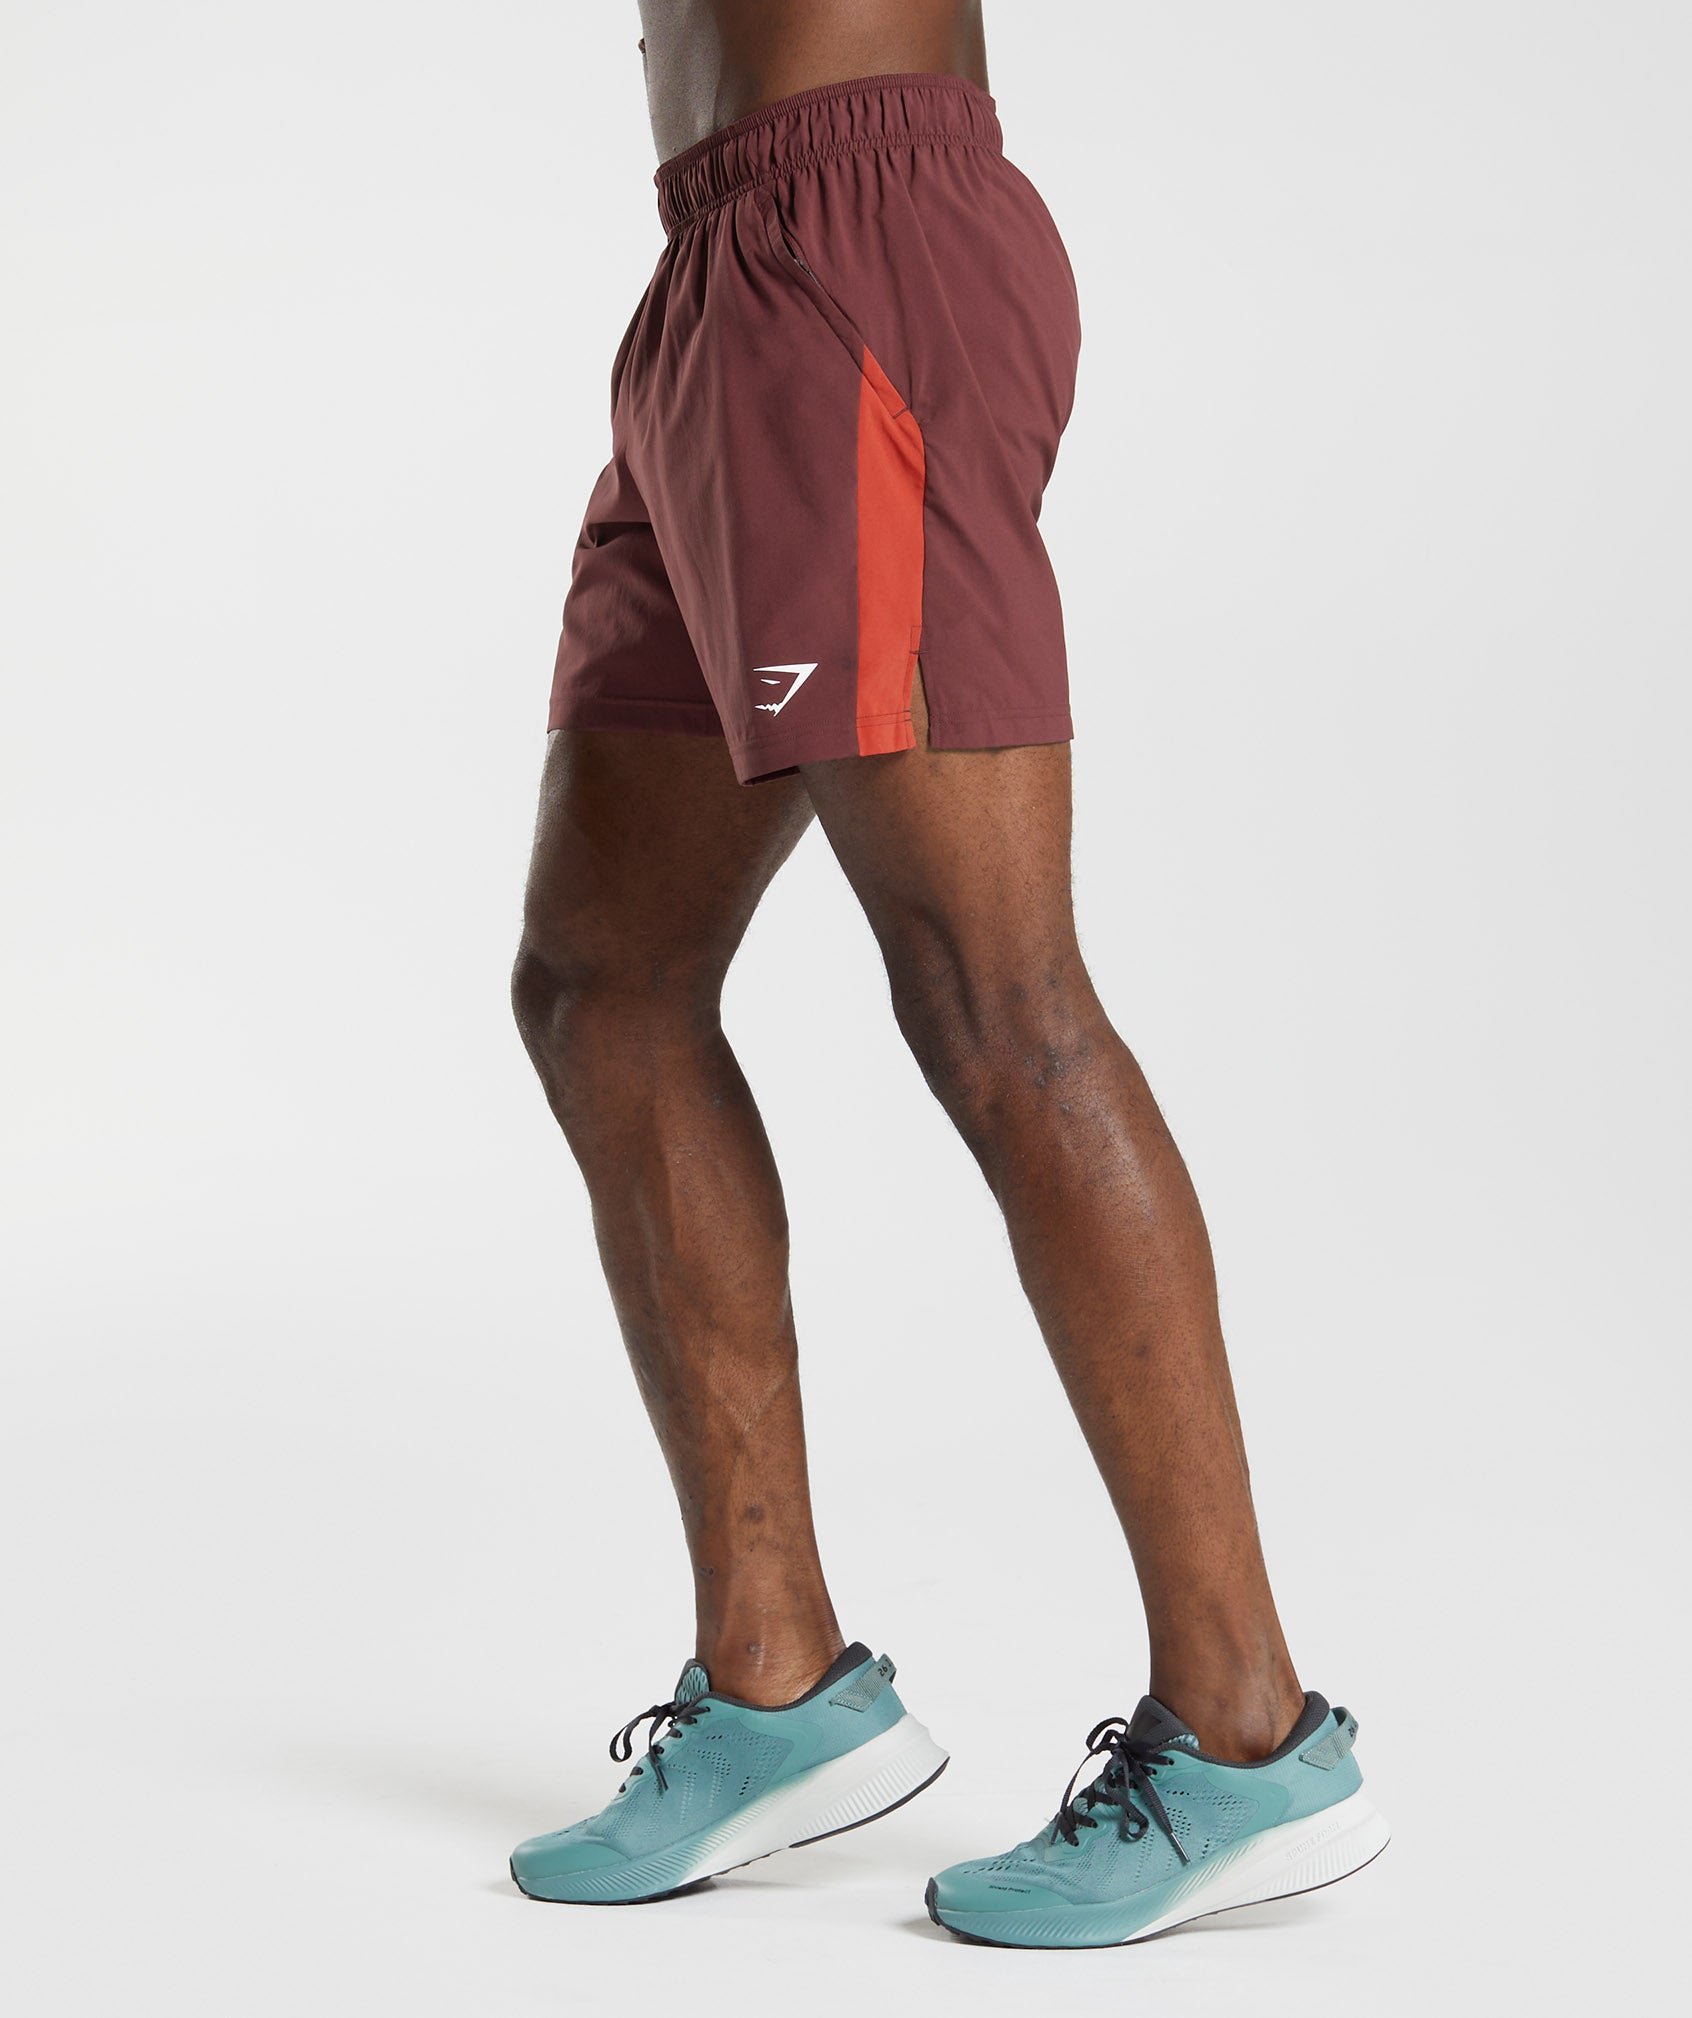 Sport Shorts in Baked Maroon/Salsa Red